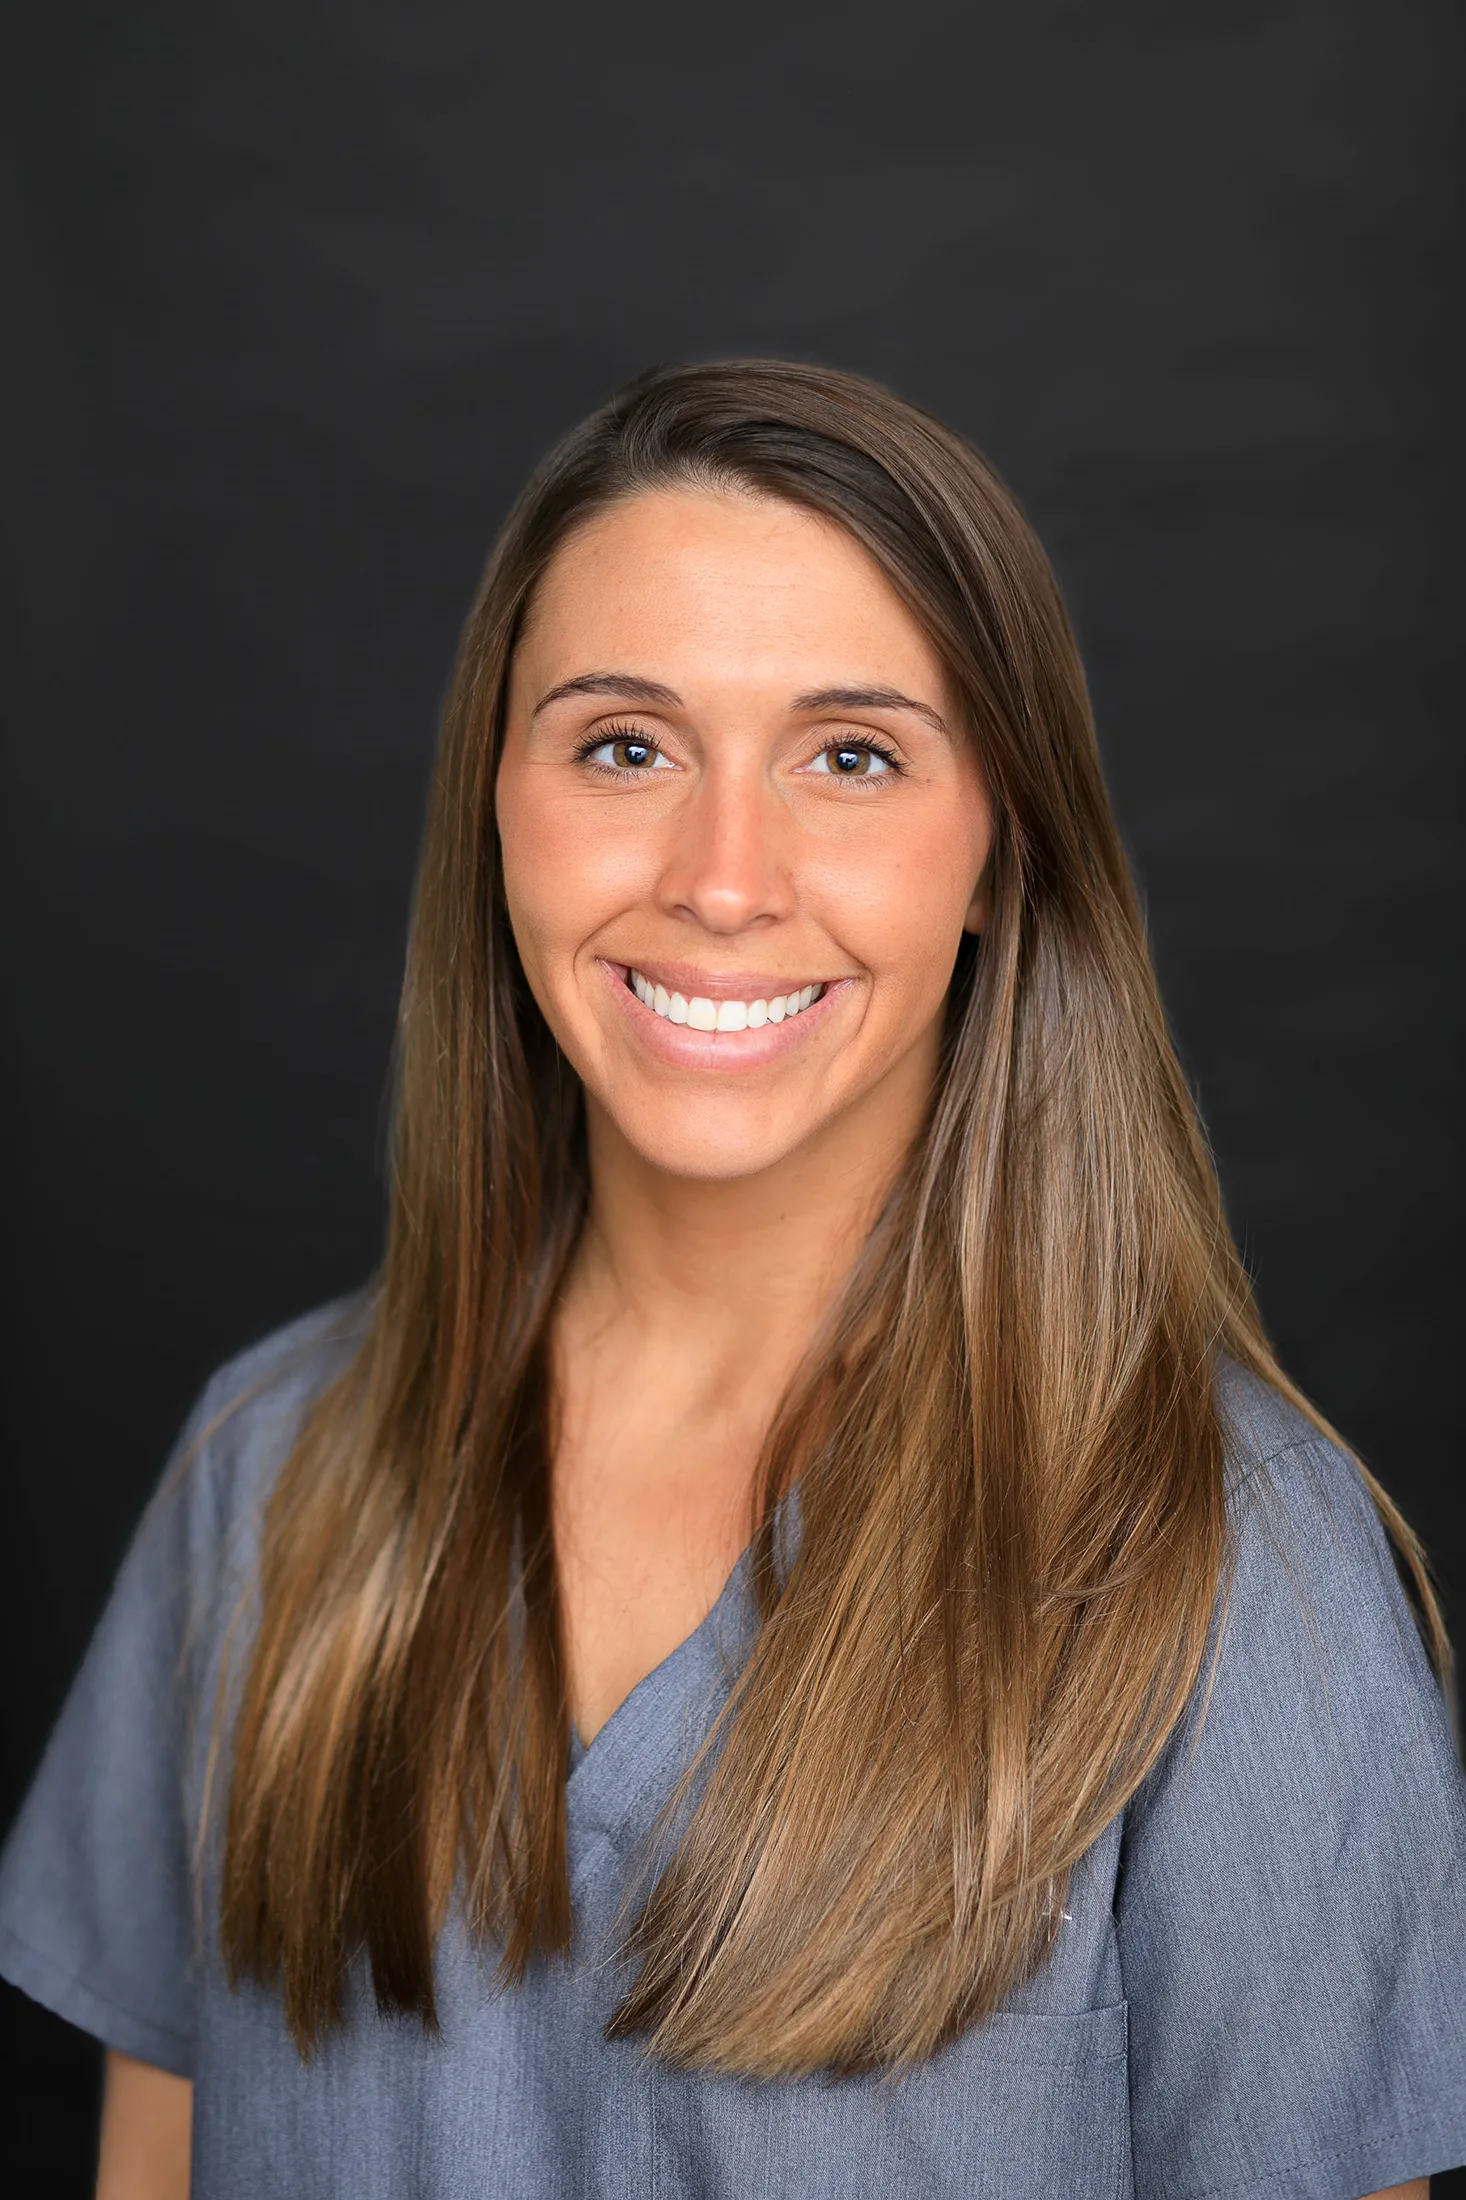 MACKENZIE – SURGICAL ASSISTANT at Oral and Maxillofacial Surgery Associates